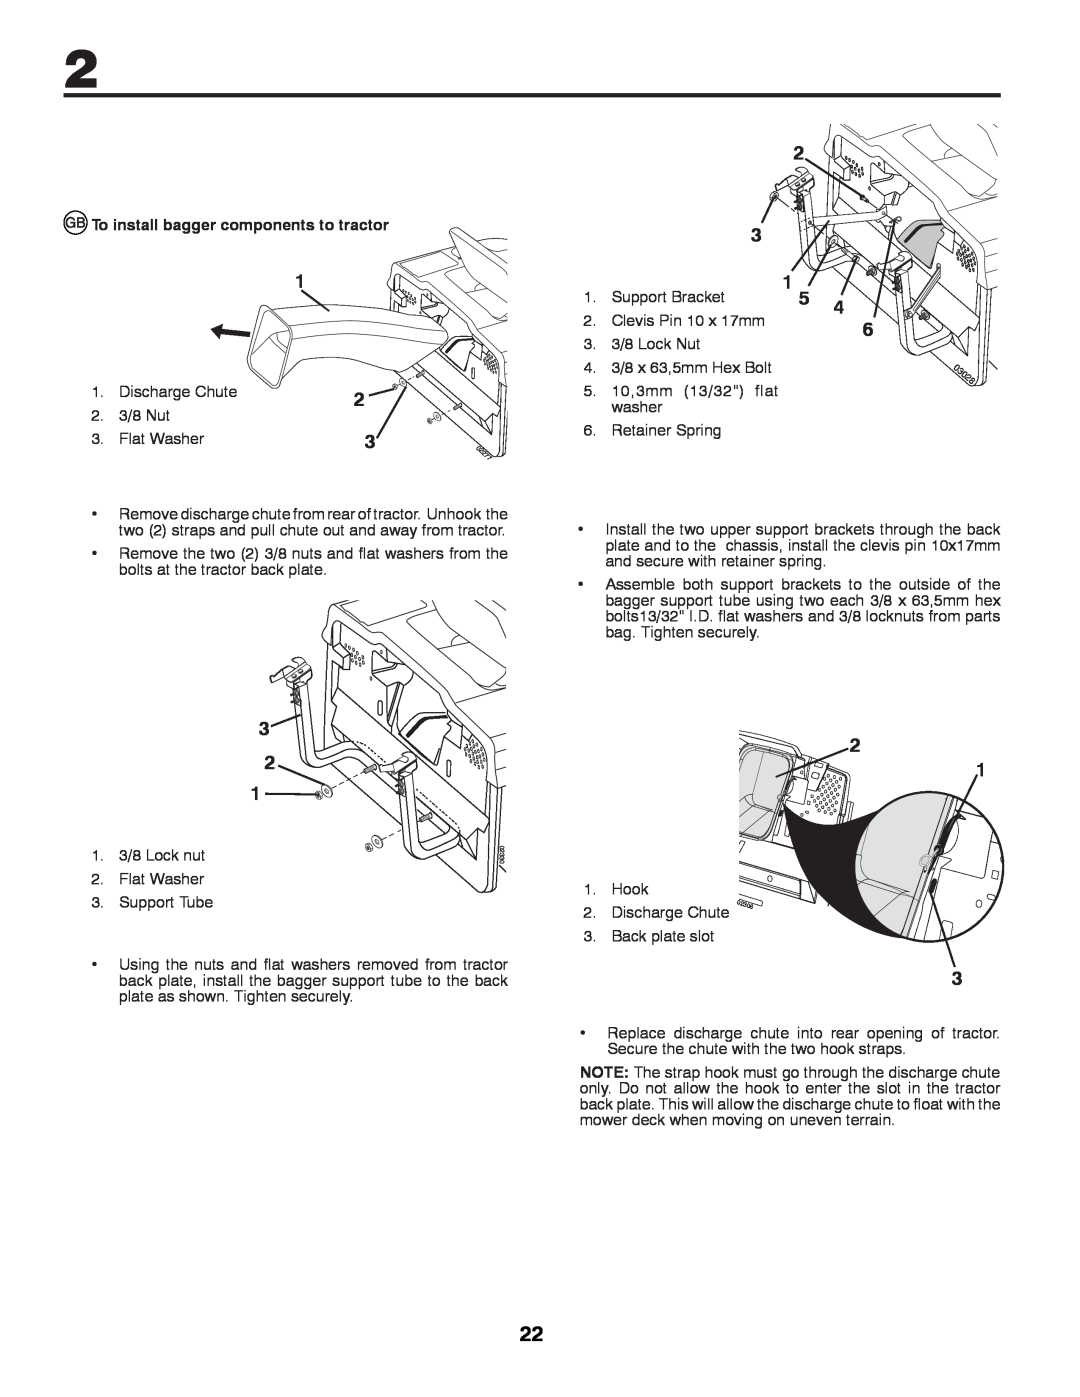 Partner Tech P200107HRB instruction manual To install bagger components to tractor, Discharge Chute 